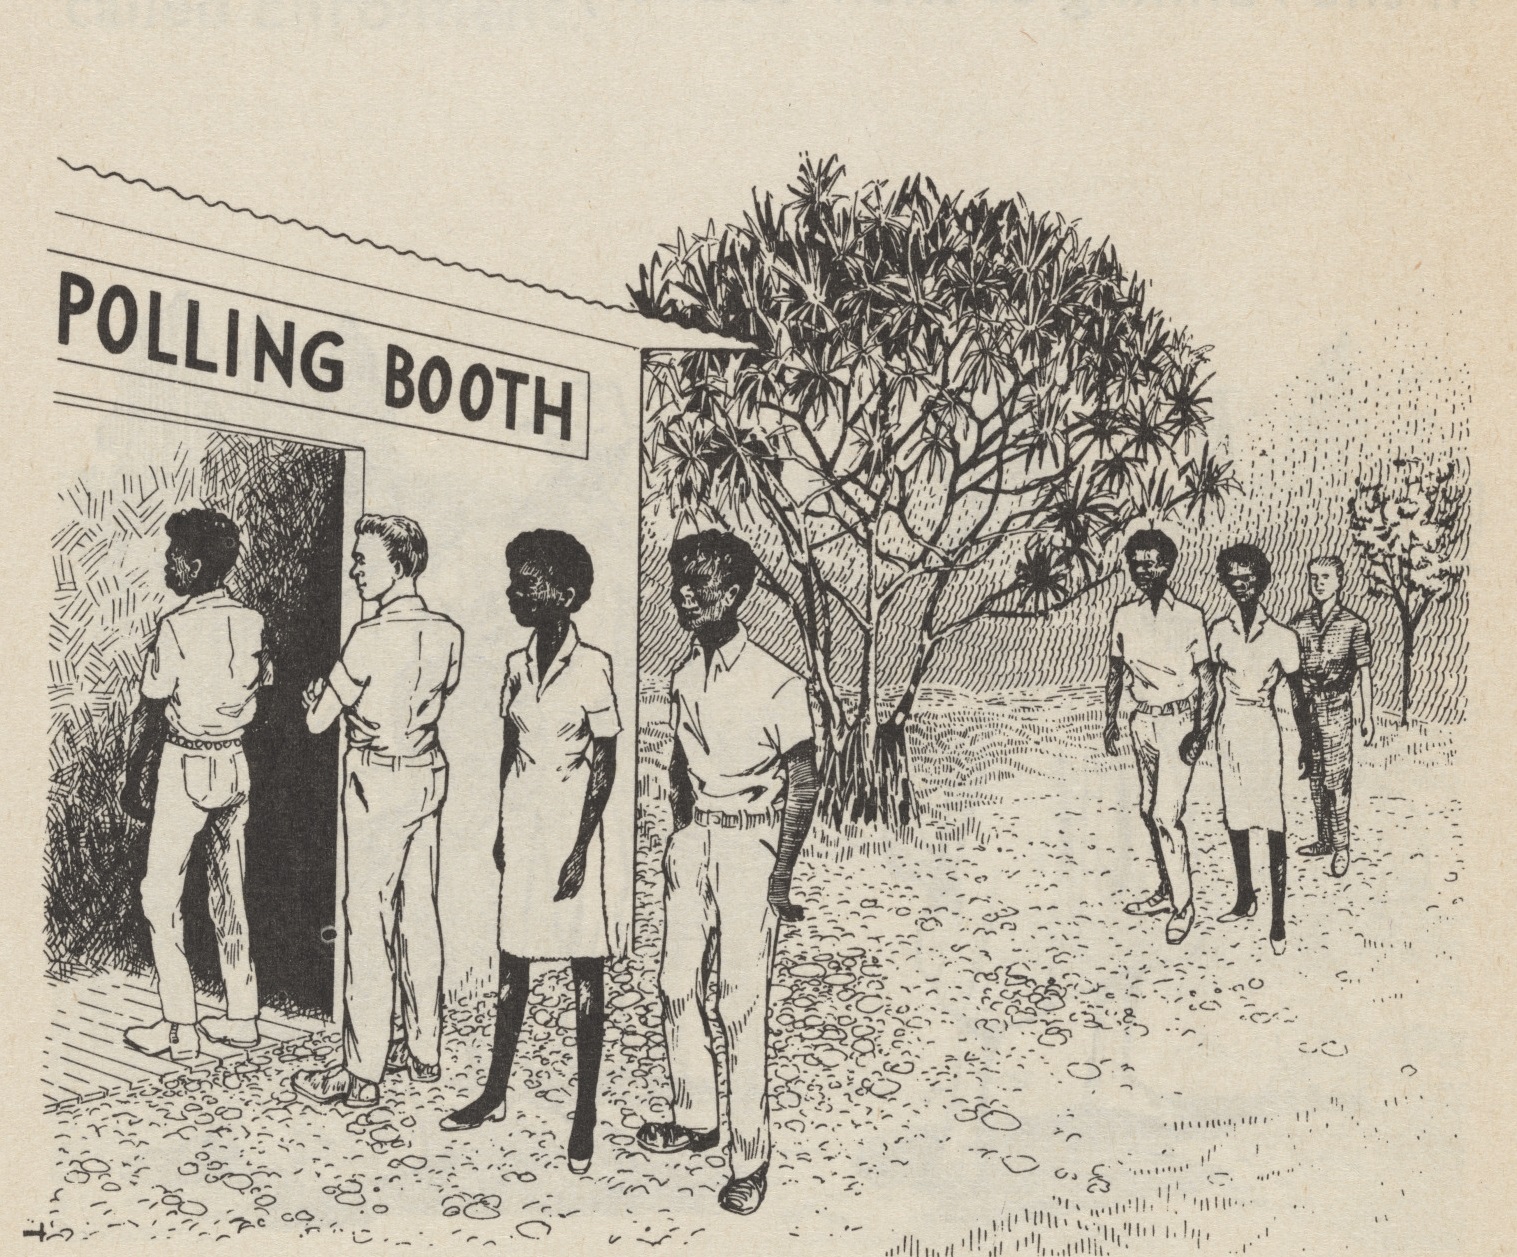 <p>Illustration of people, including Aboriginal people, voting. Produced in 1970 by the Western Australian government in order to educate people (especially in remote communities) about voting.</p>
